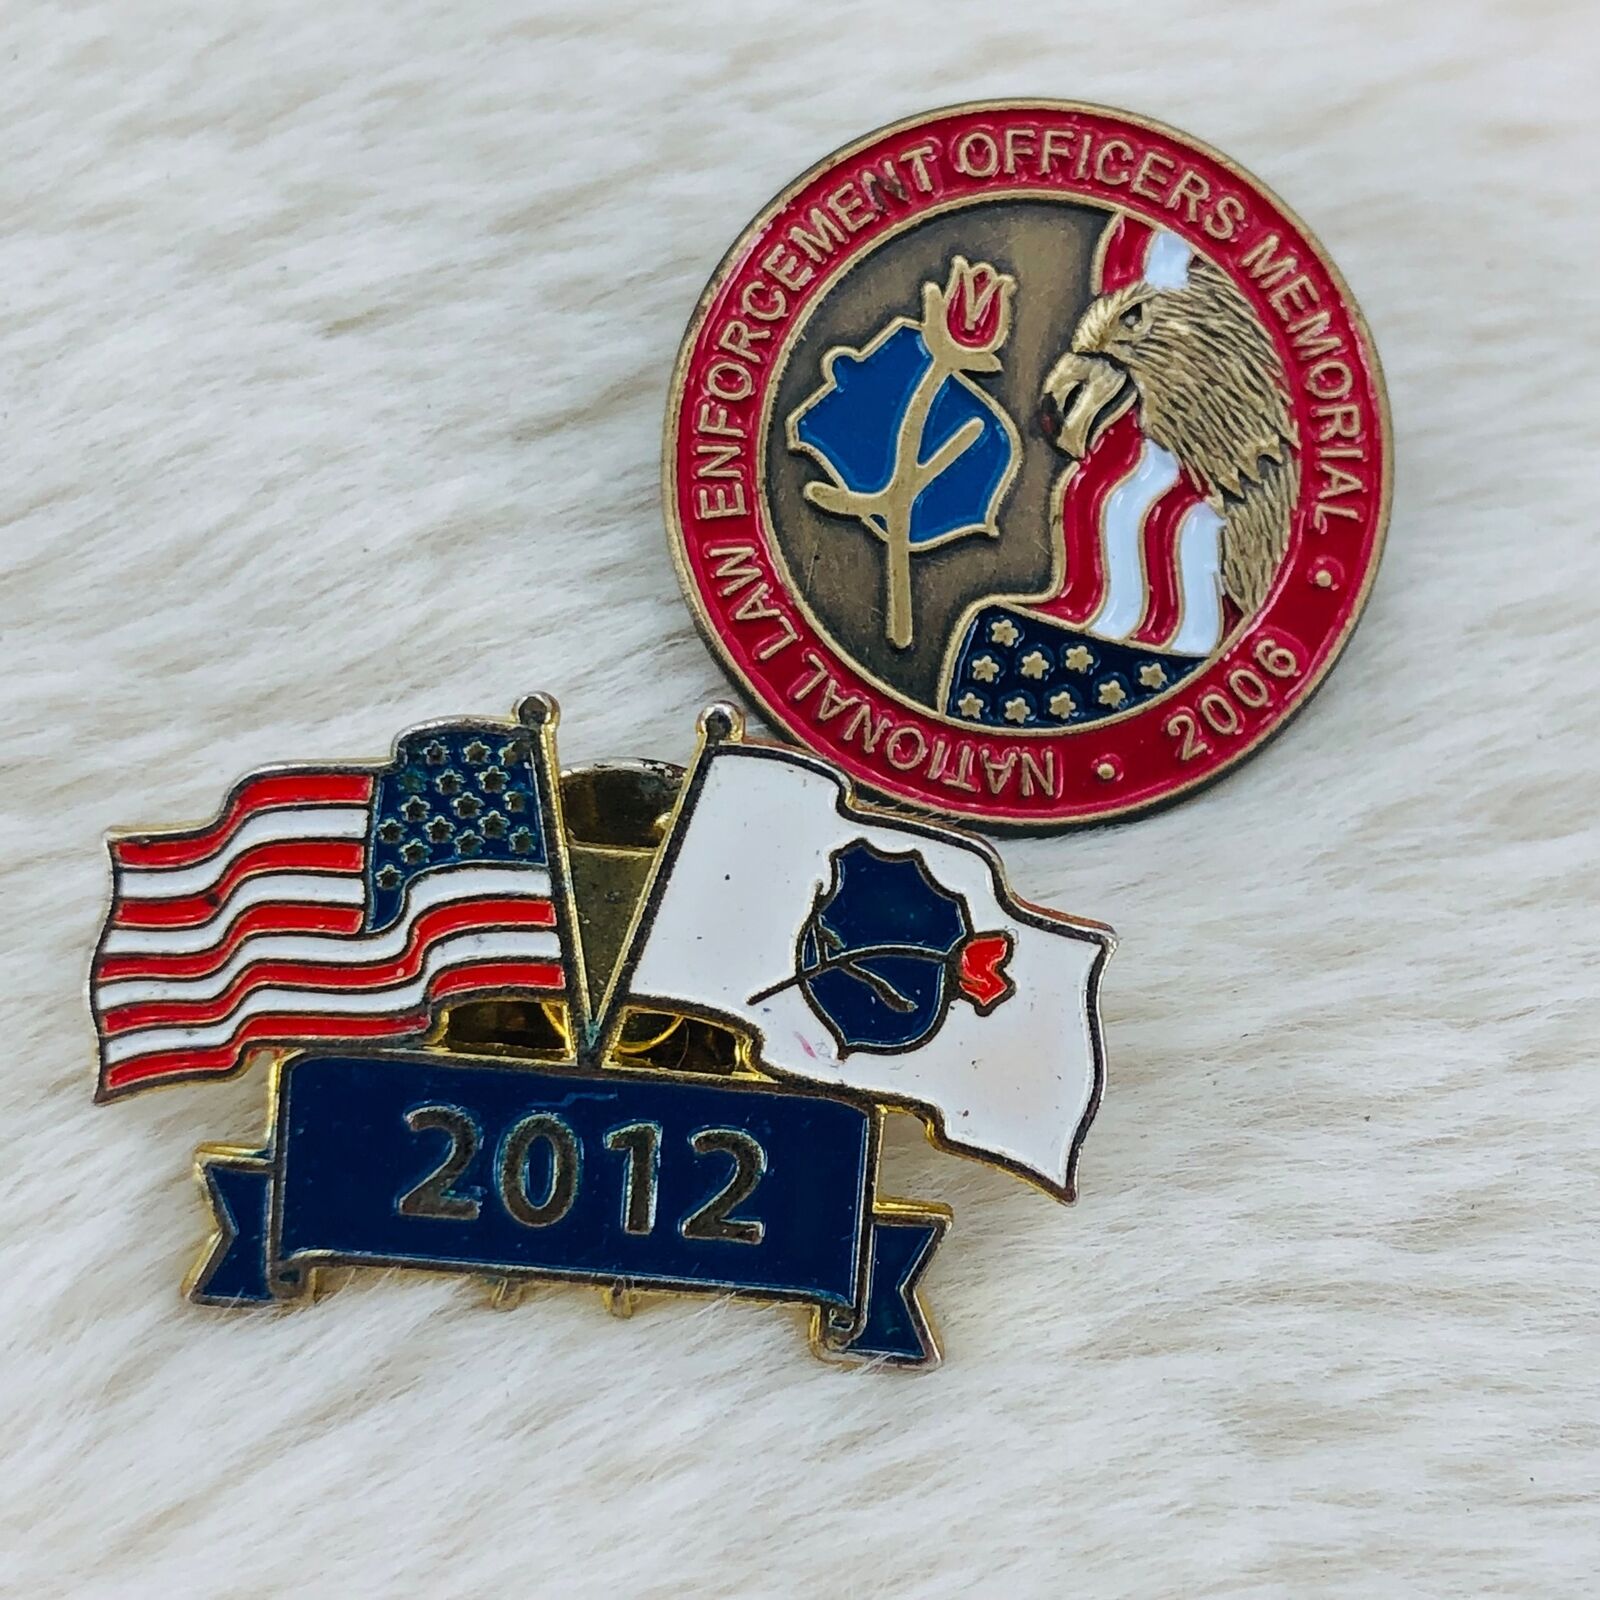 2006 & 2012 National Law Enforcement Officers Memorial Police Lapel Pin Lot